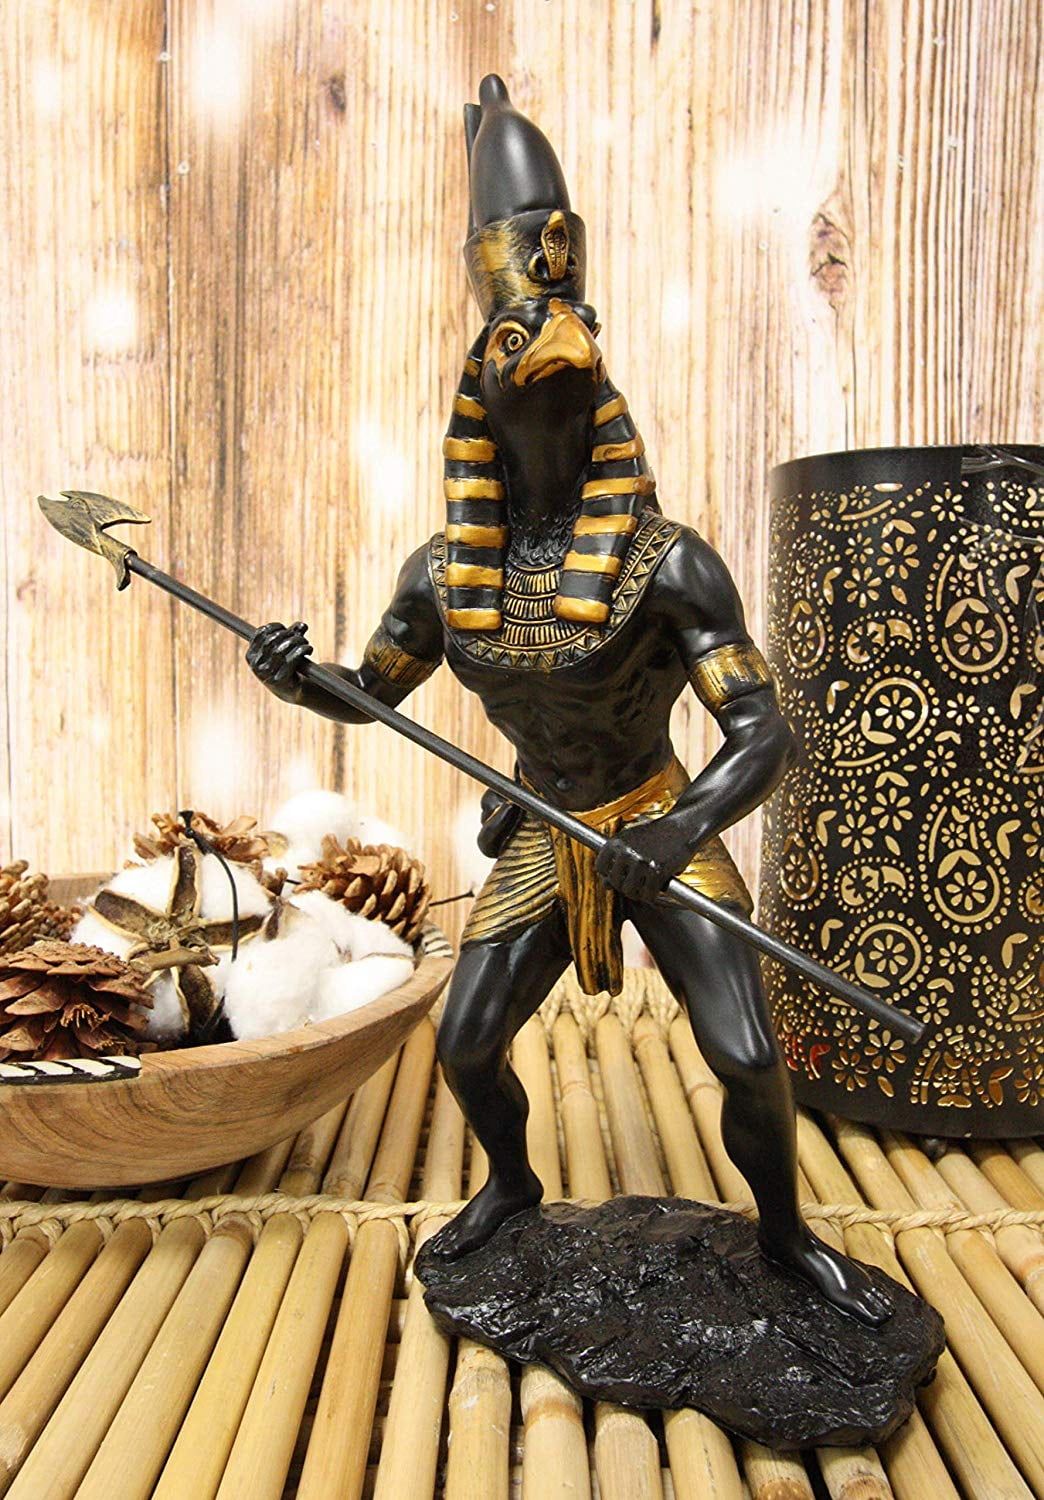 Great Figurine Great Gift Unique Statue of Egyptian art Ancient Horus Statue Significant Egyptian God Powerful Deity Home Decor